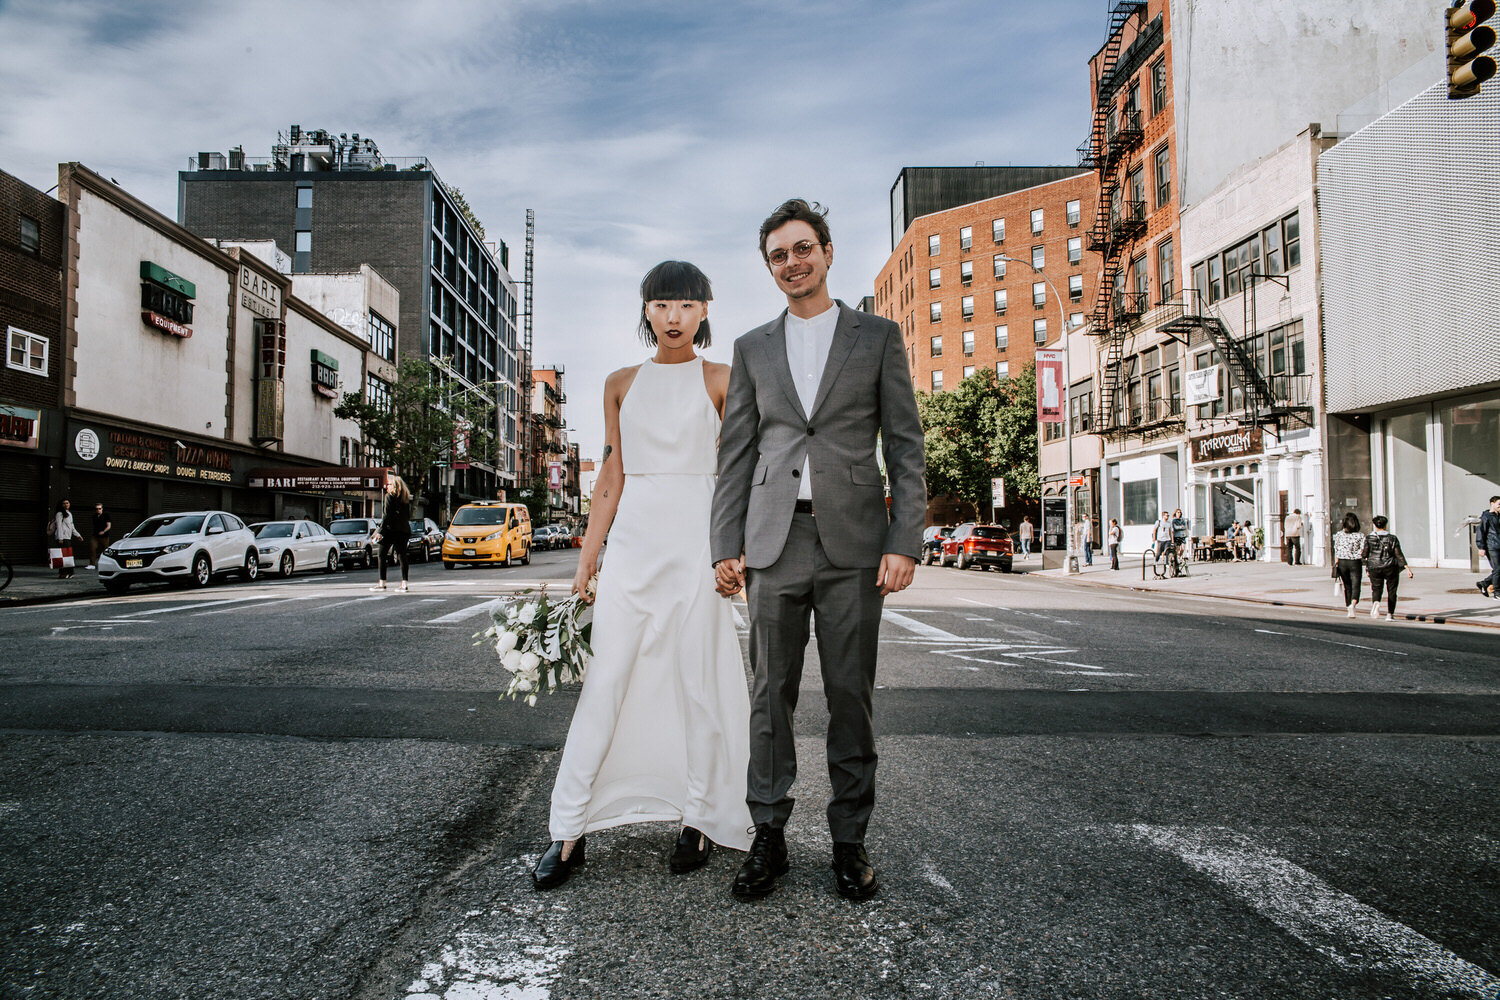 new york lowwer east side wedding intimate ceremony eclectic modern18.jpg